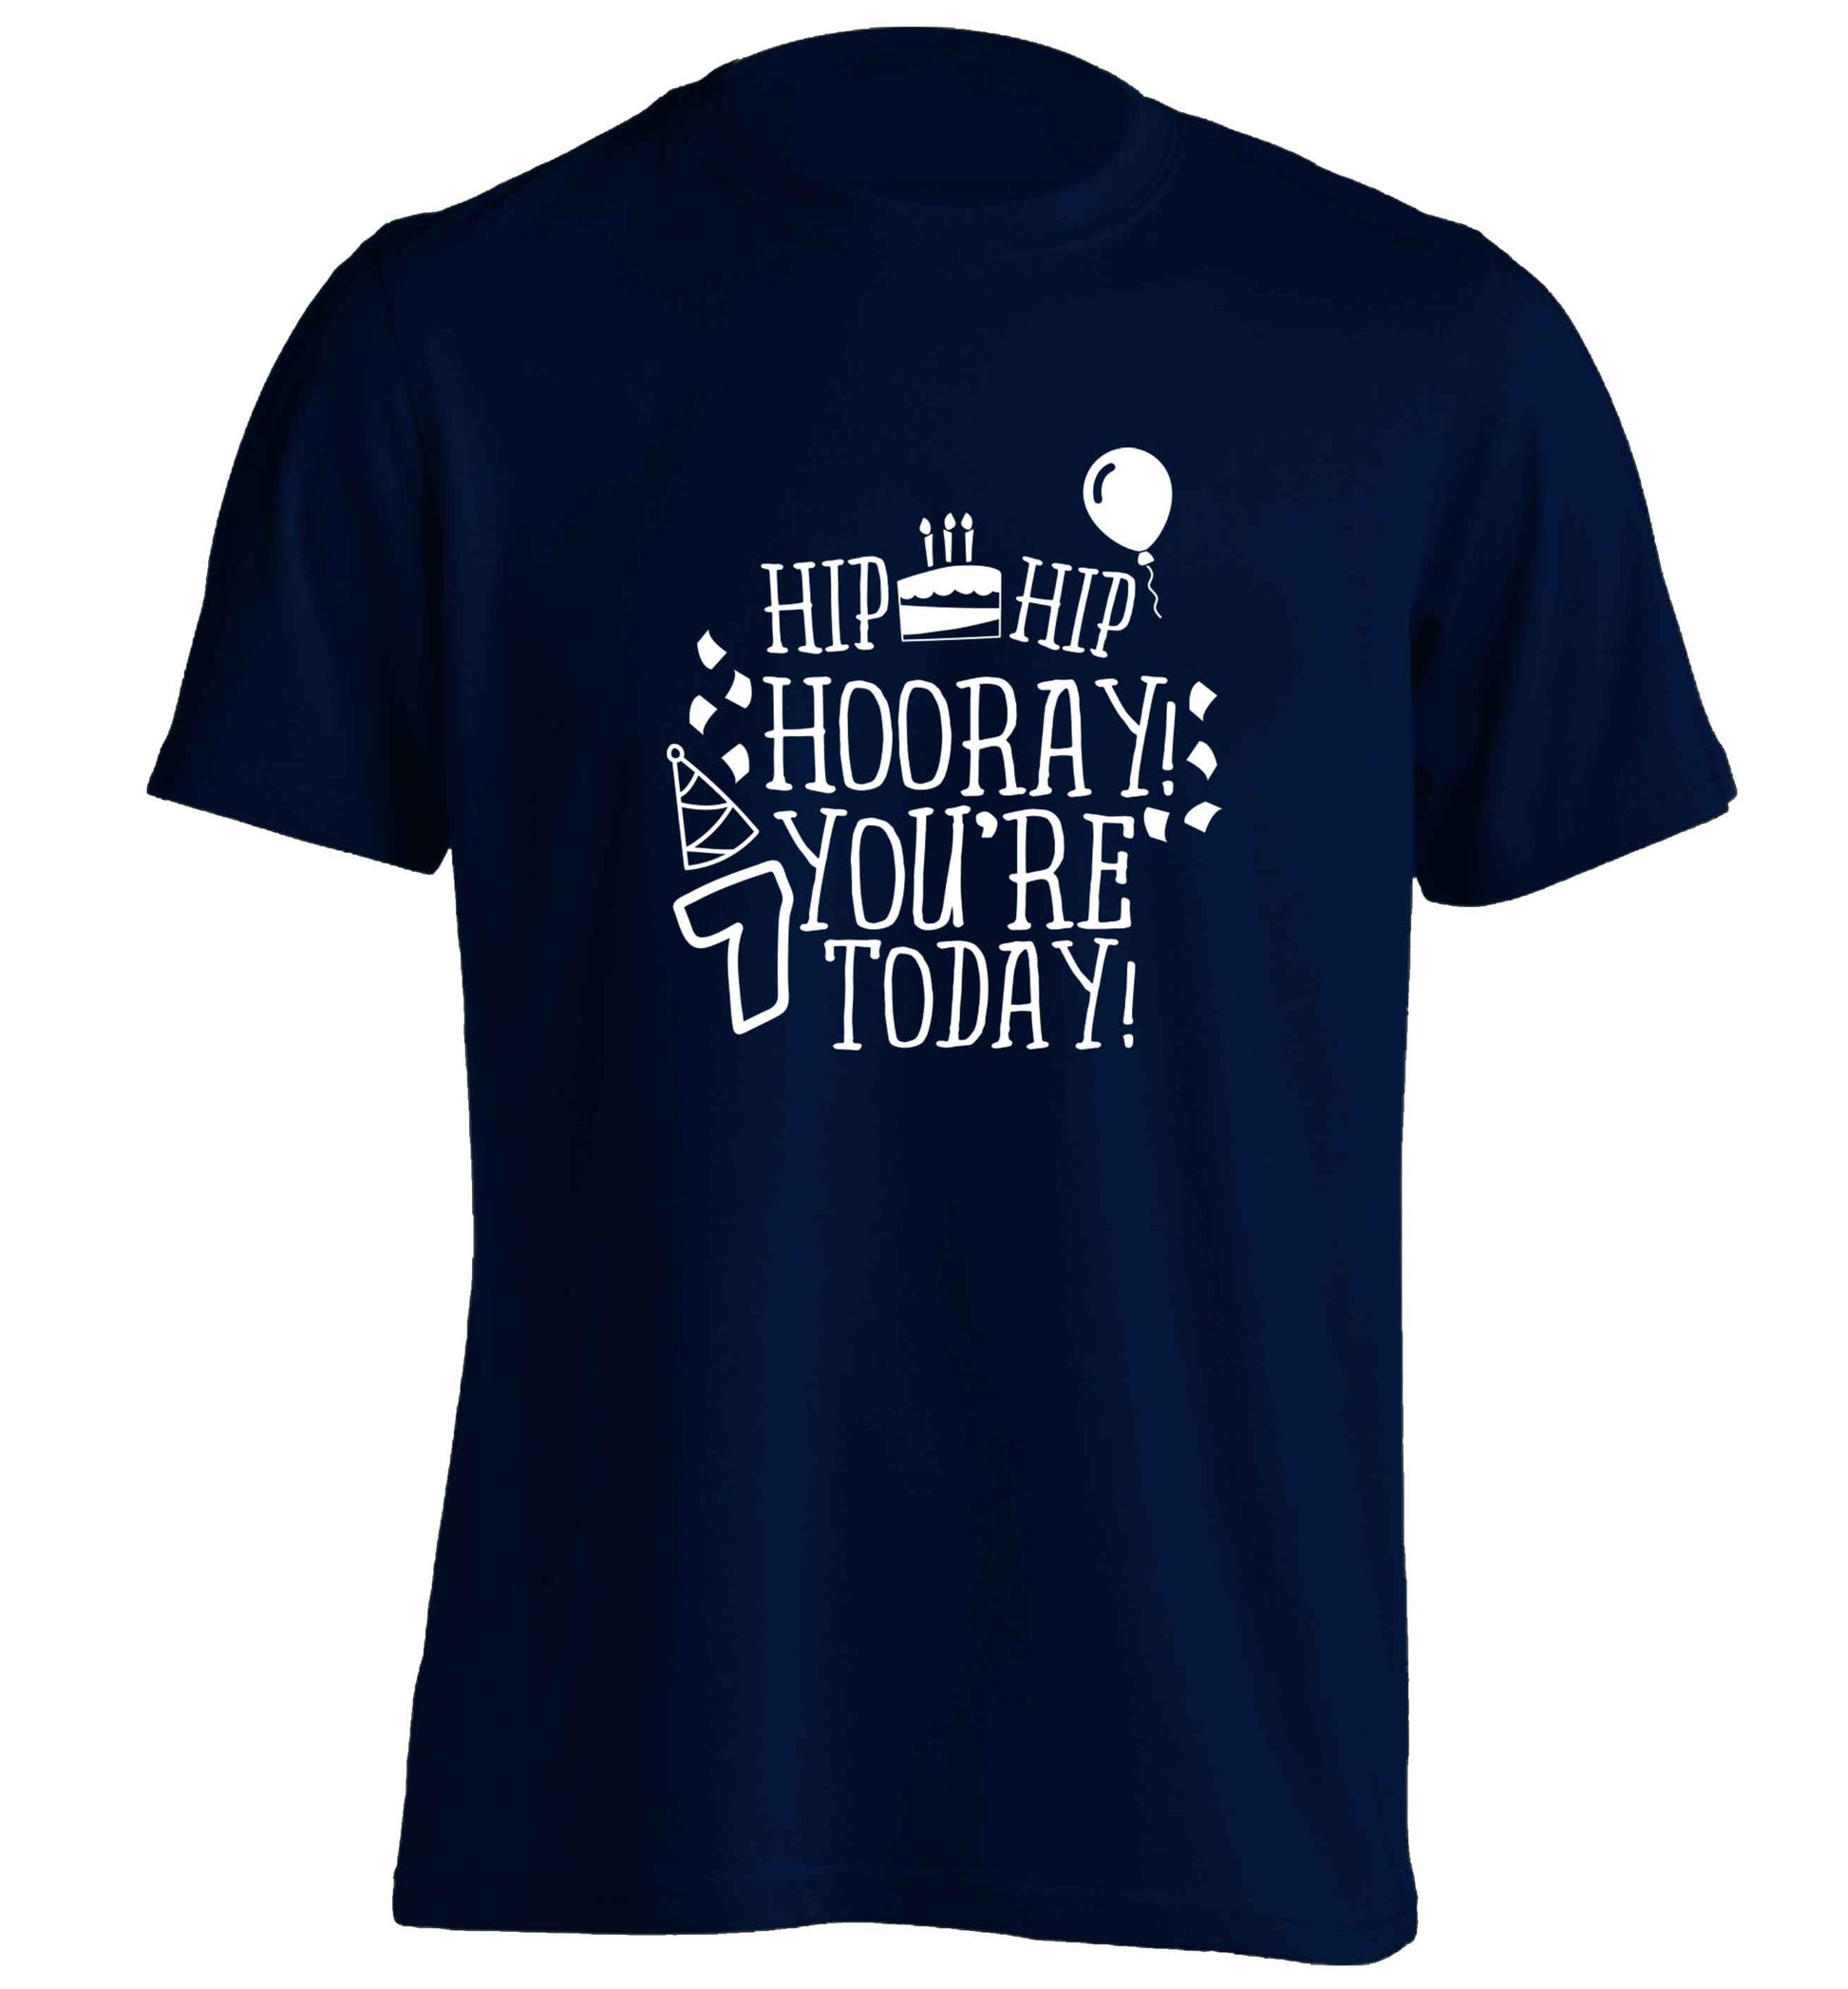 Hip hip hooray you're seven today! adults unisex navy Tshirt 2XL